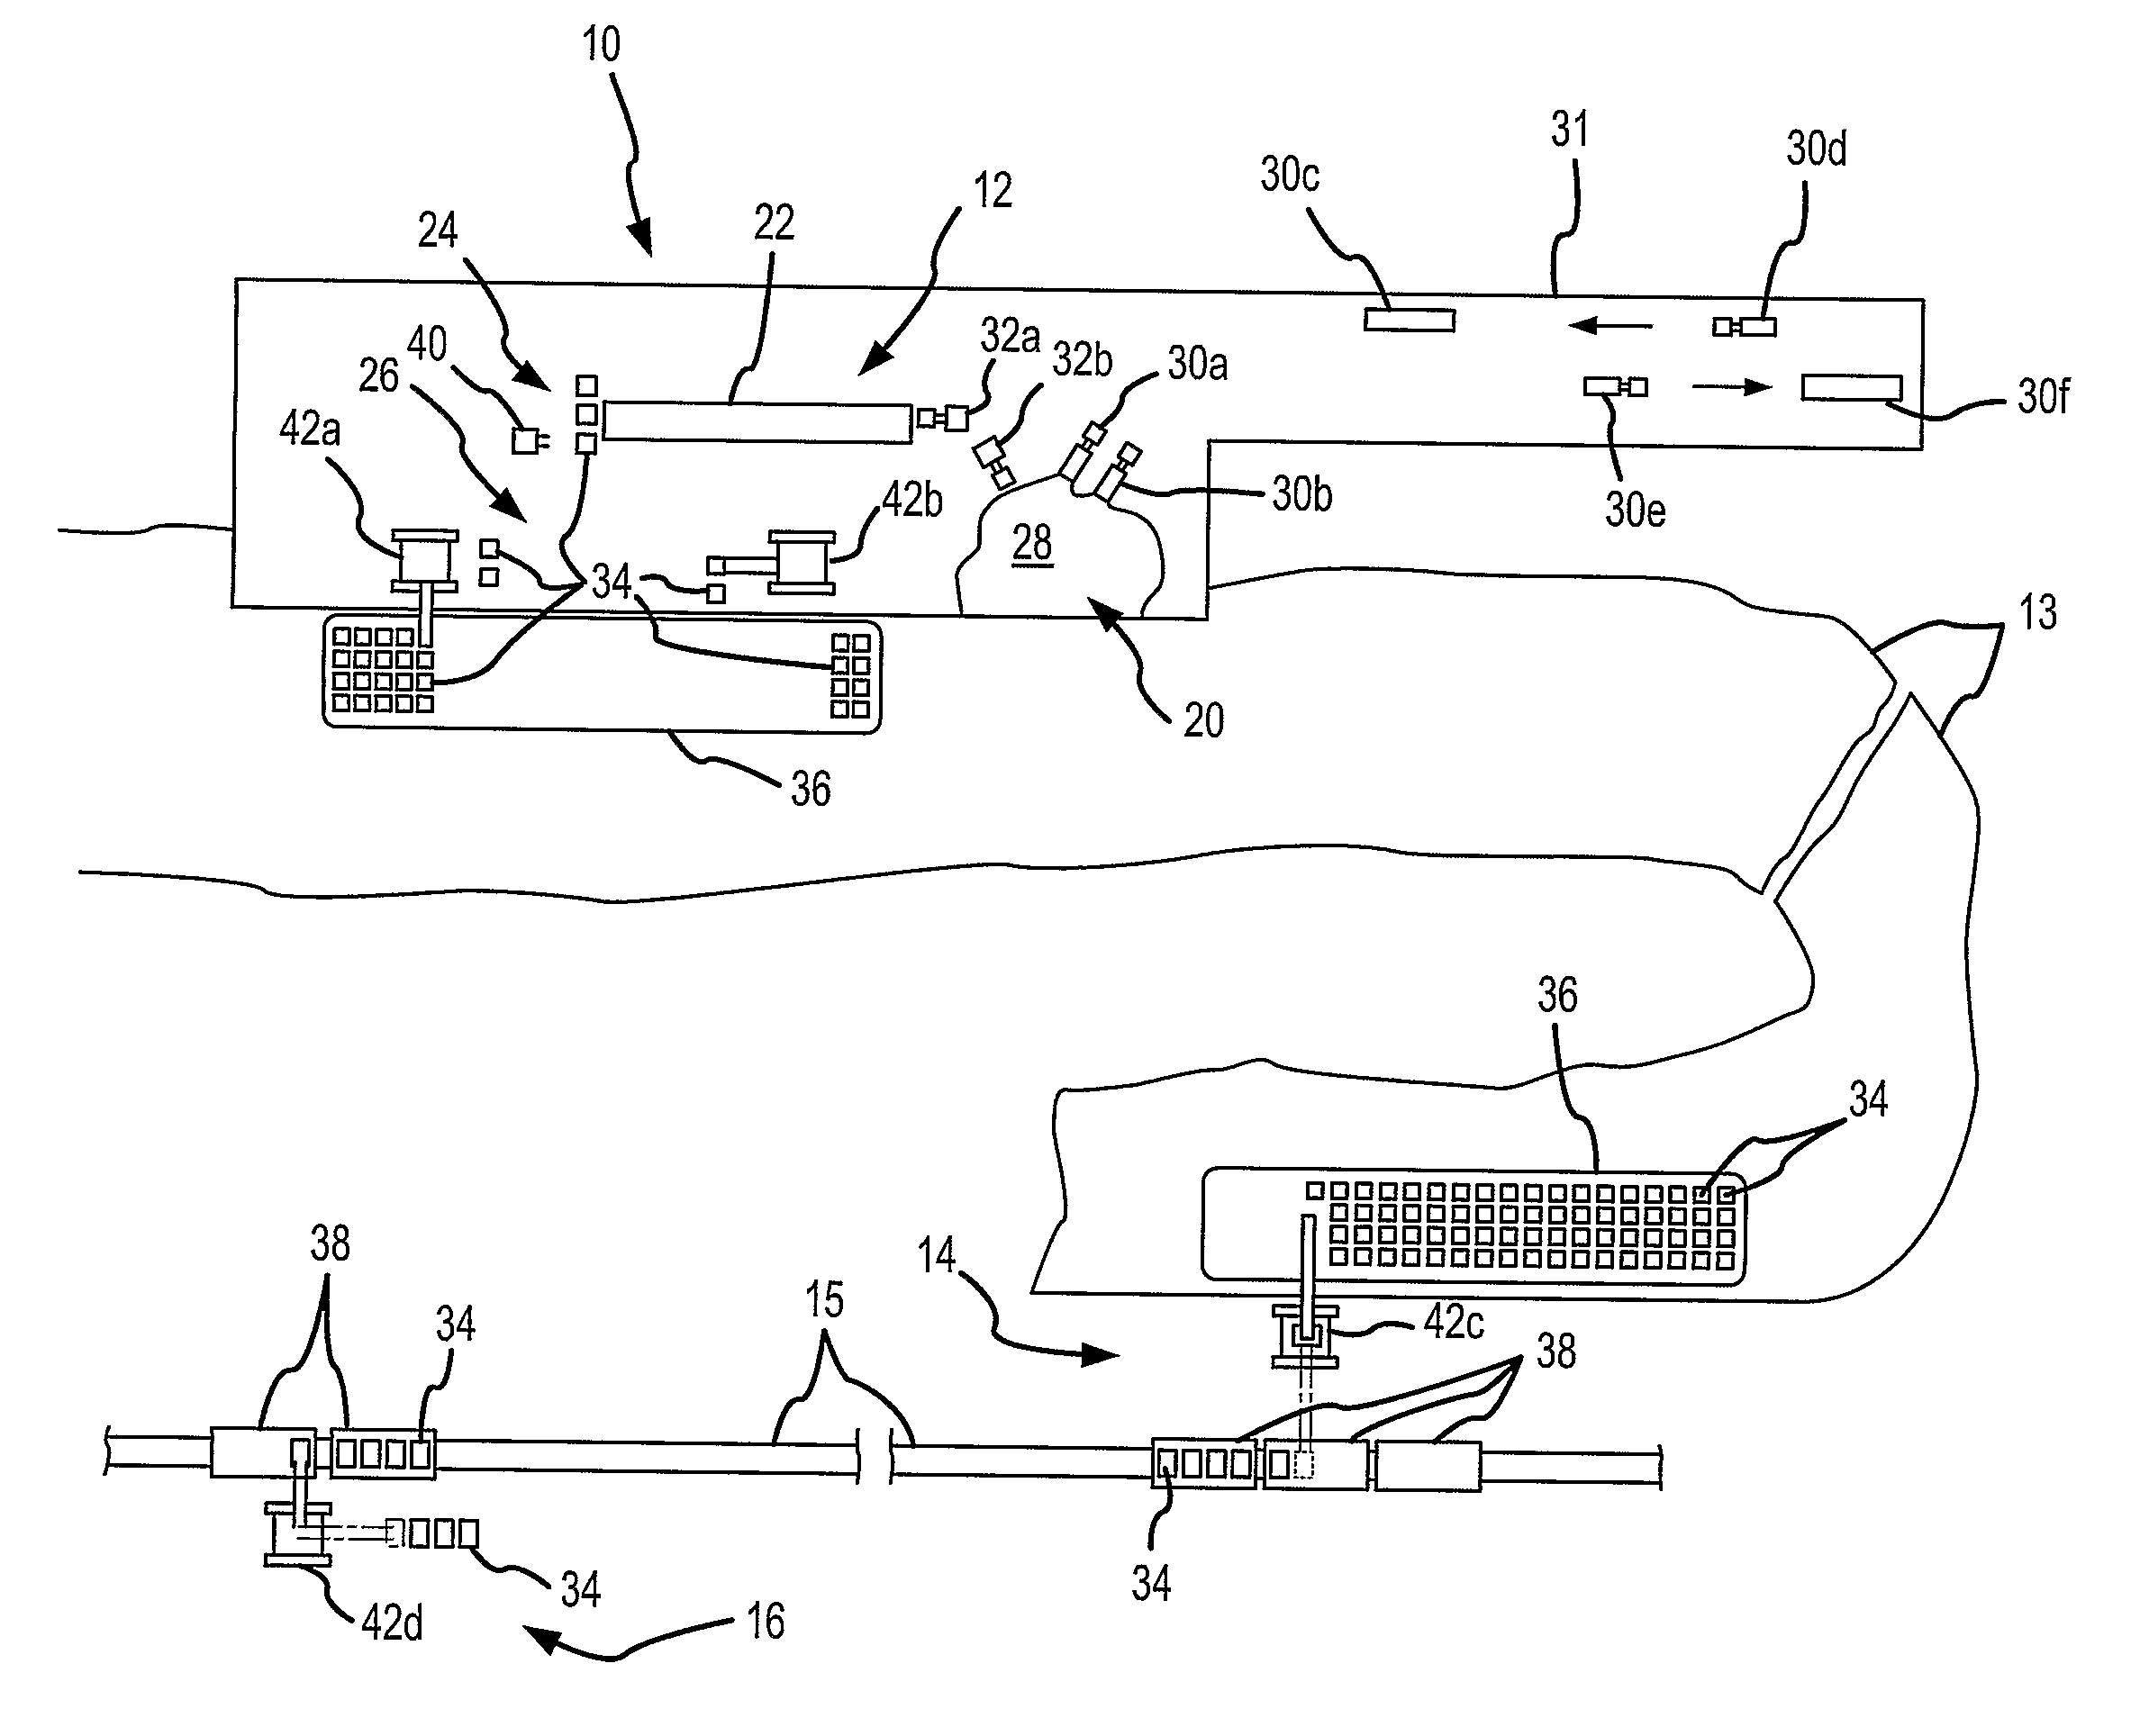 Systems and methods of processing and transporting waste